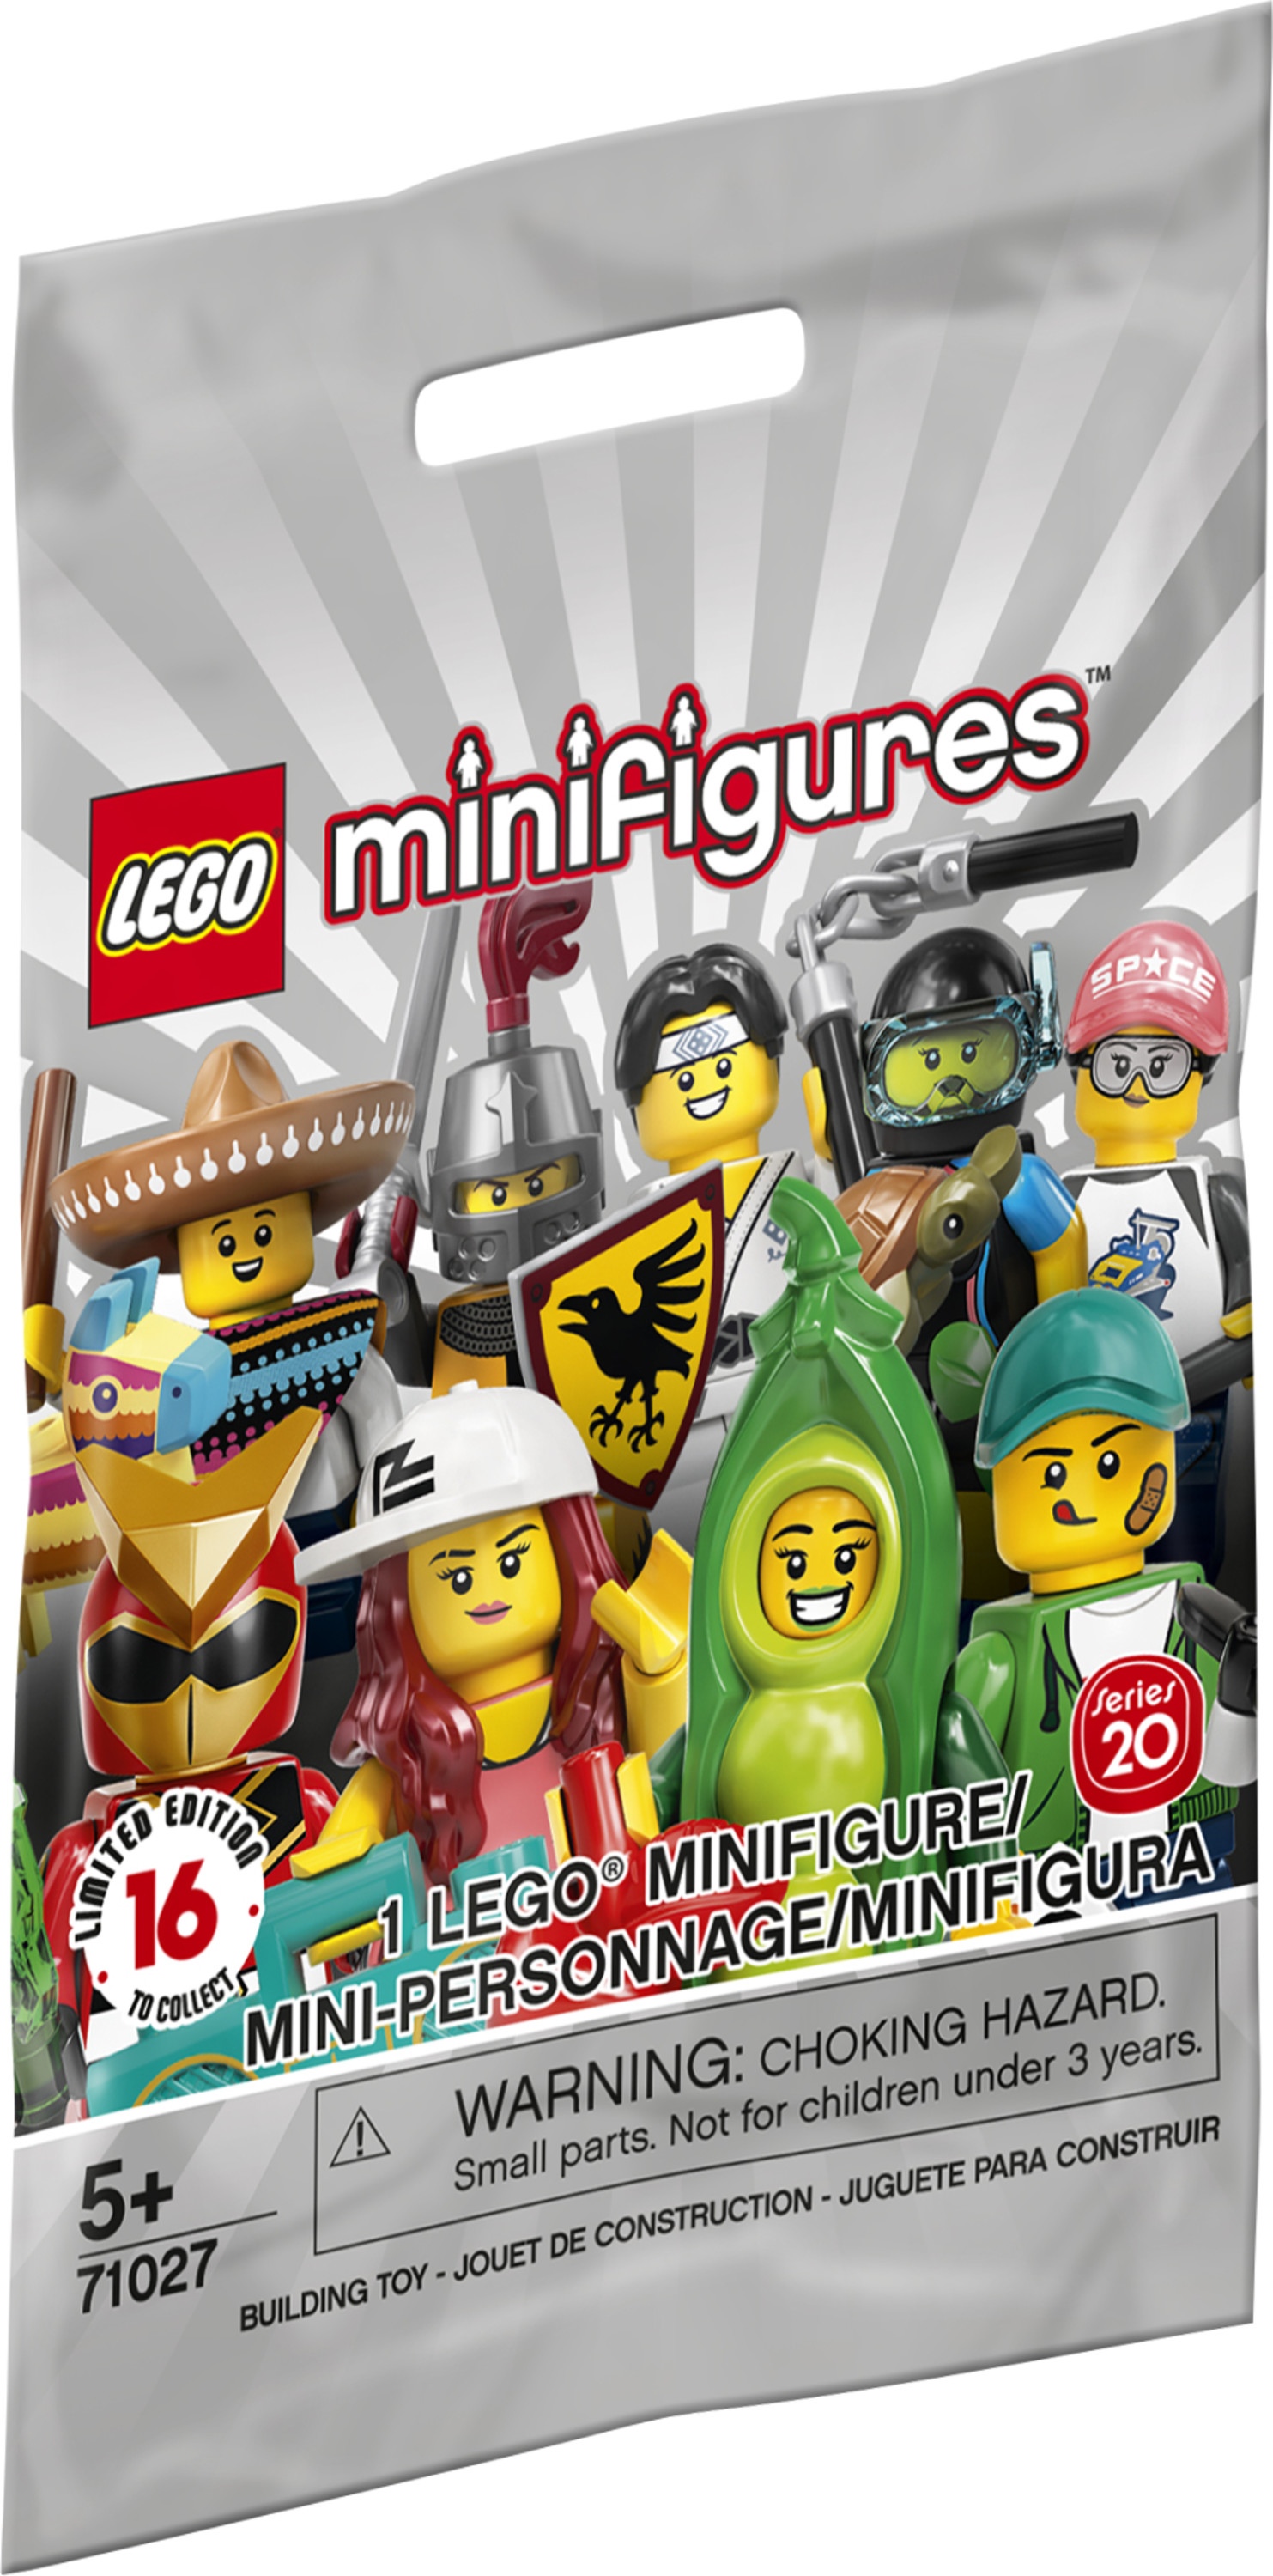 LEGO Minifigures Series 20 71027 Building Kit (1 of 16 to Collect), featuring Characters to Collect and Add to Existing Sets - image 4 of 5